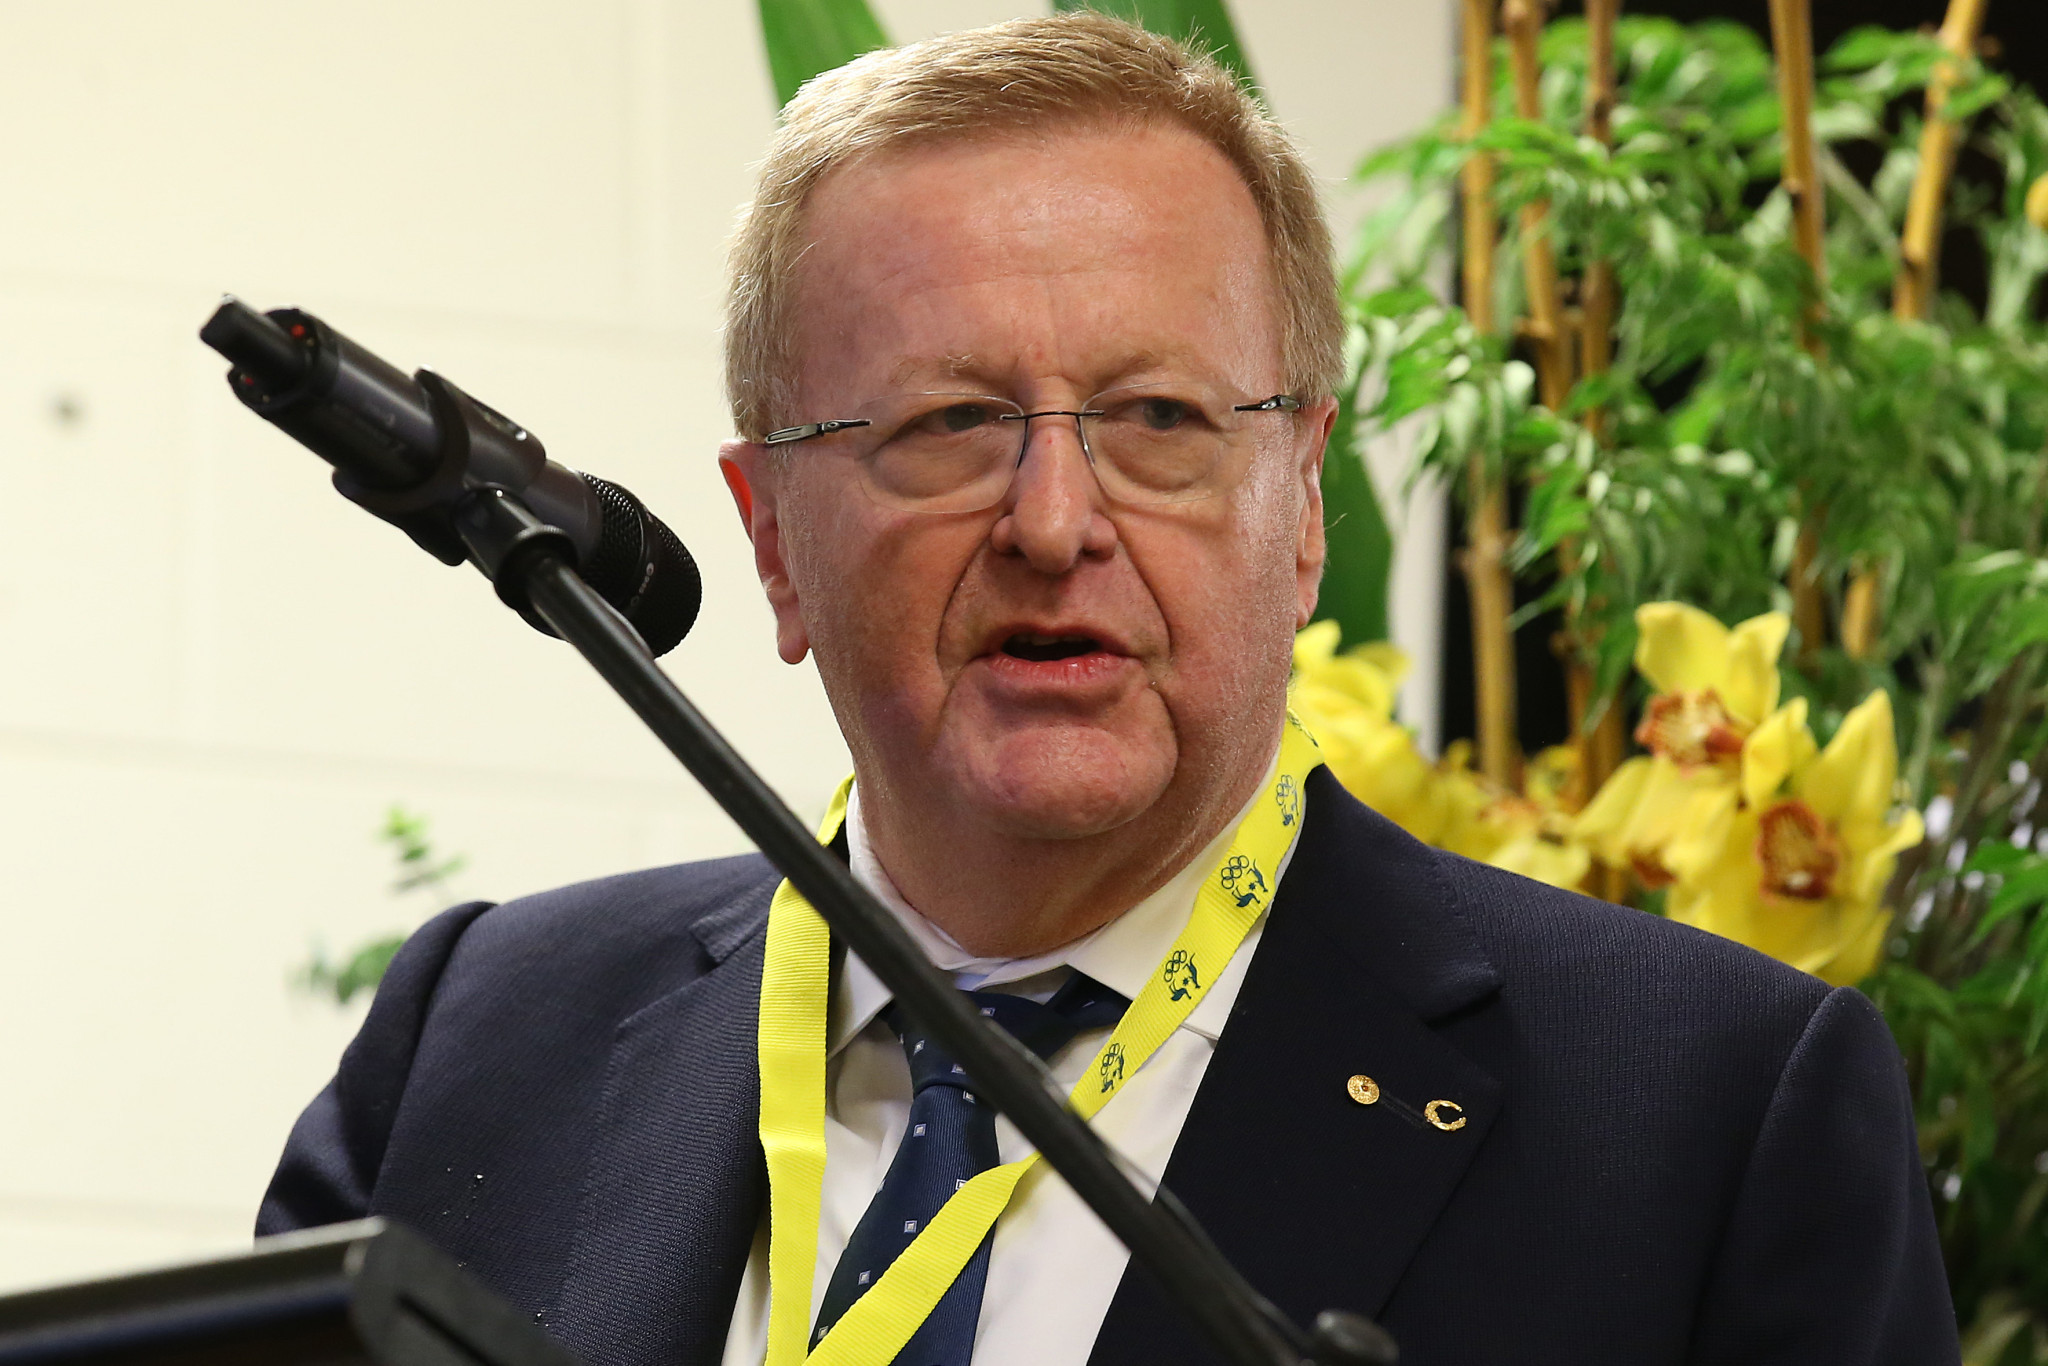 John Coates is set to stand down as AOC President after 32 years ©Getty Images